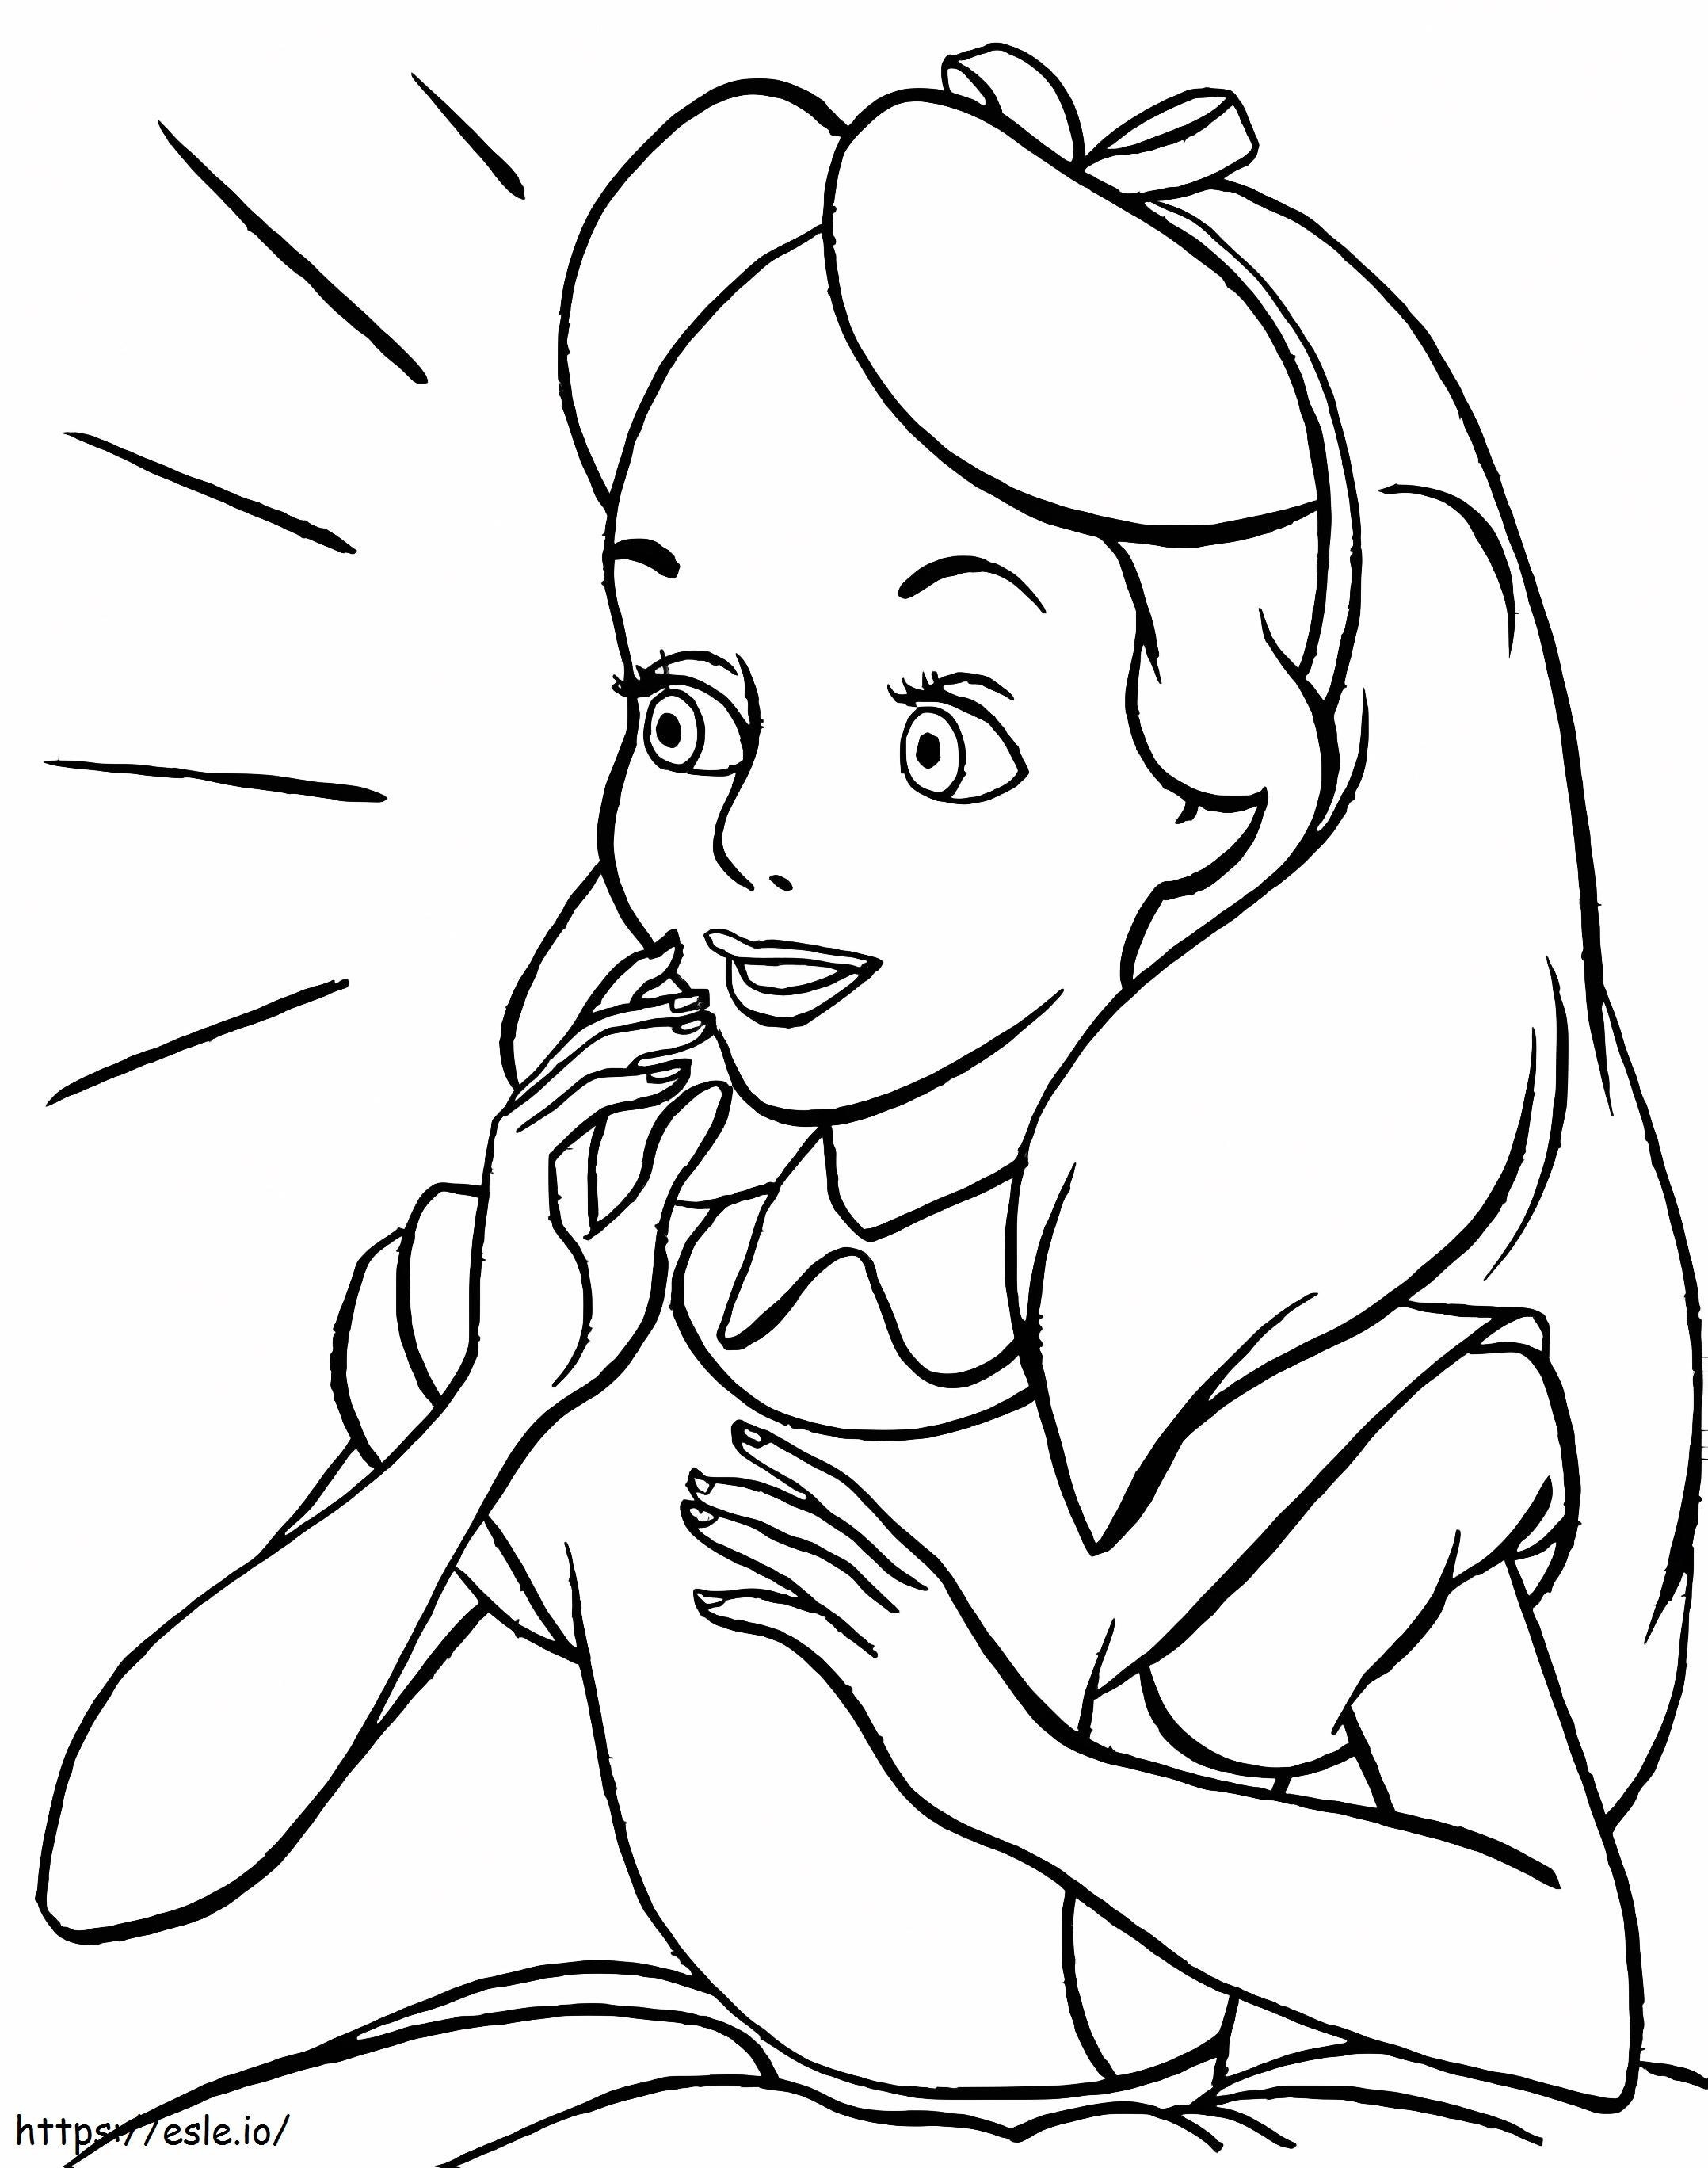 Lovely Alice From Alice In Wonderland coloring page